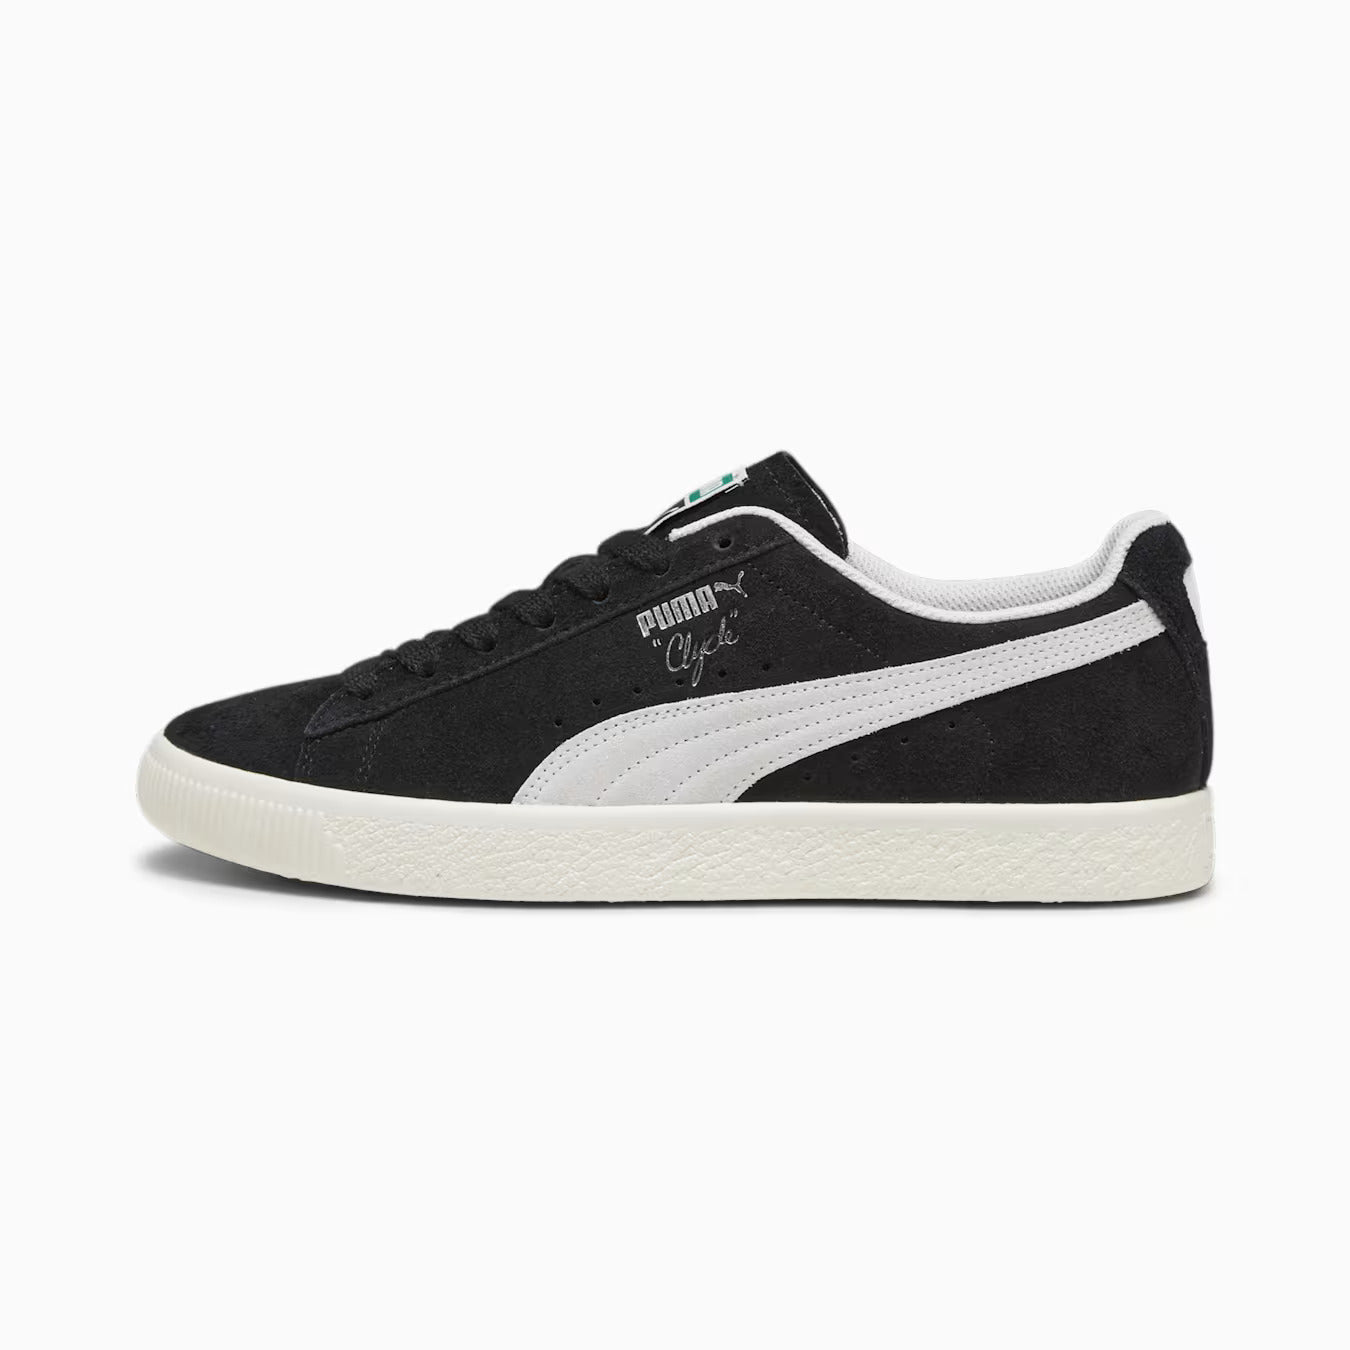 Puma Clyde Hairy Suede Black/Frosted Ivory